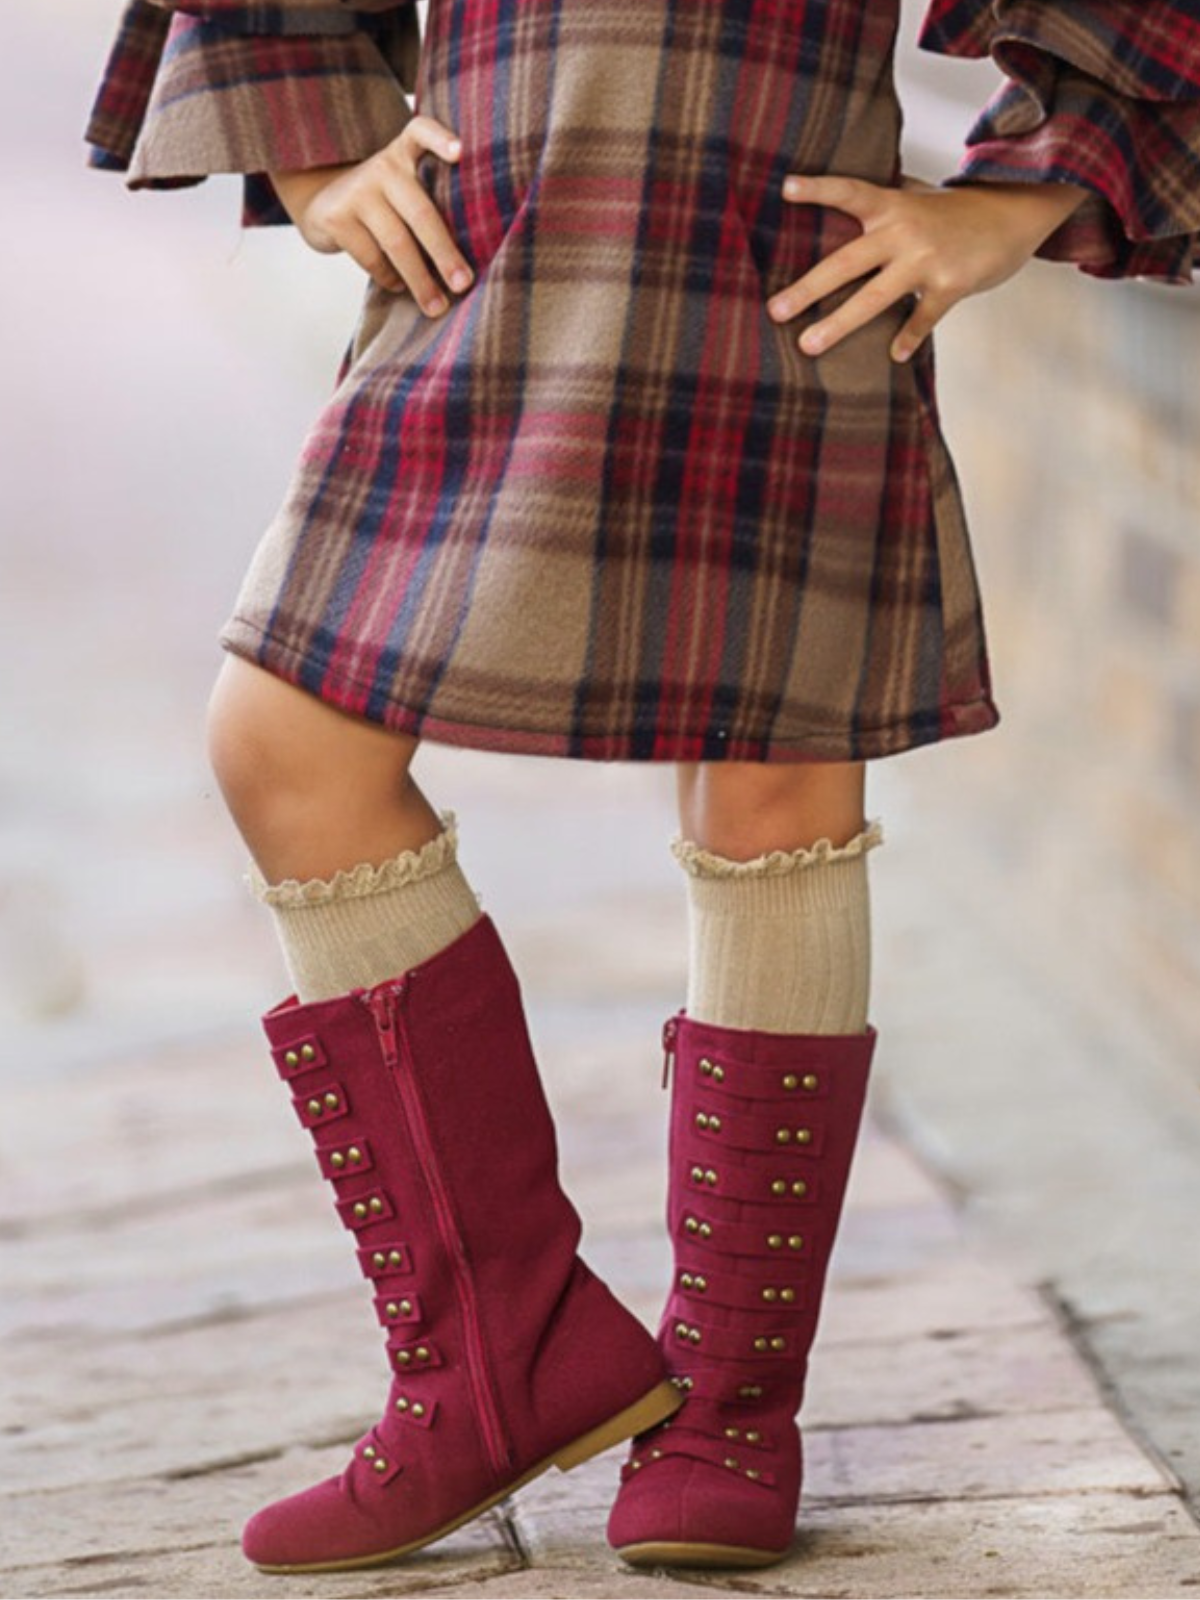 Mia Belle Girls Red Military Style Boots | Shoes By Liv and Mia